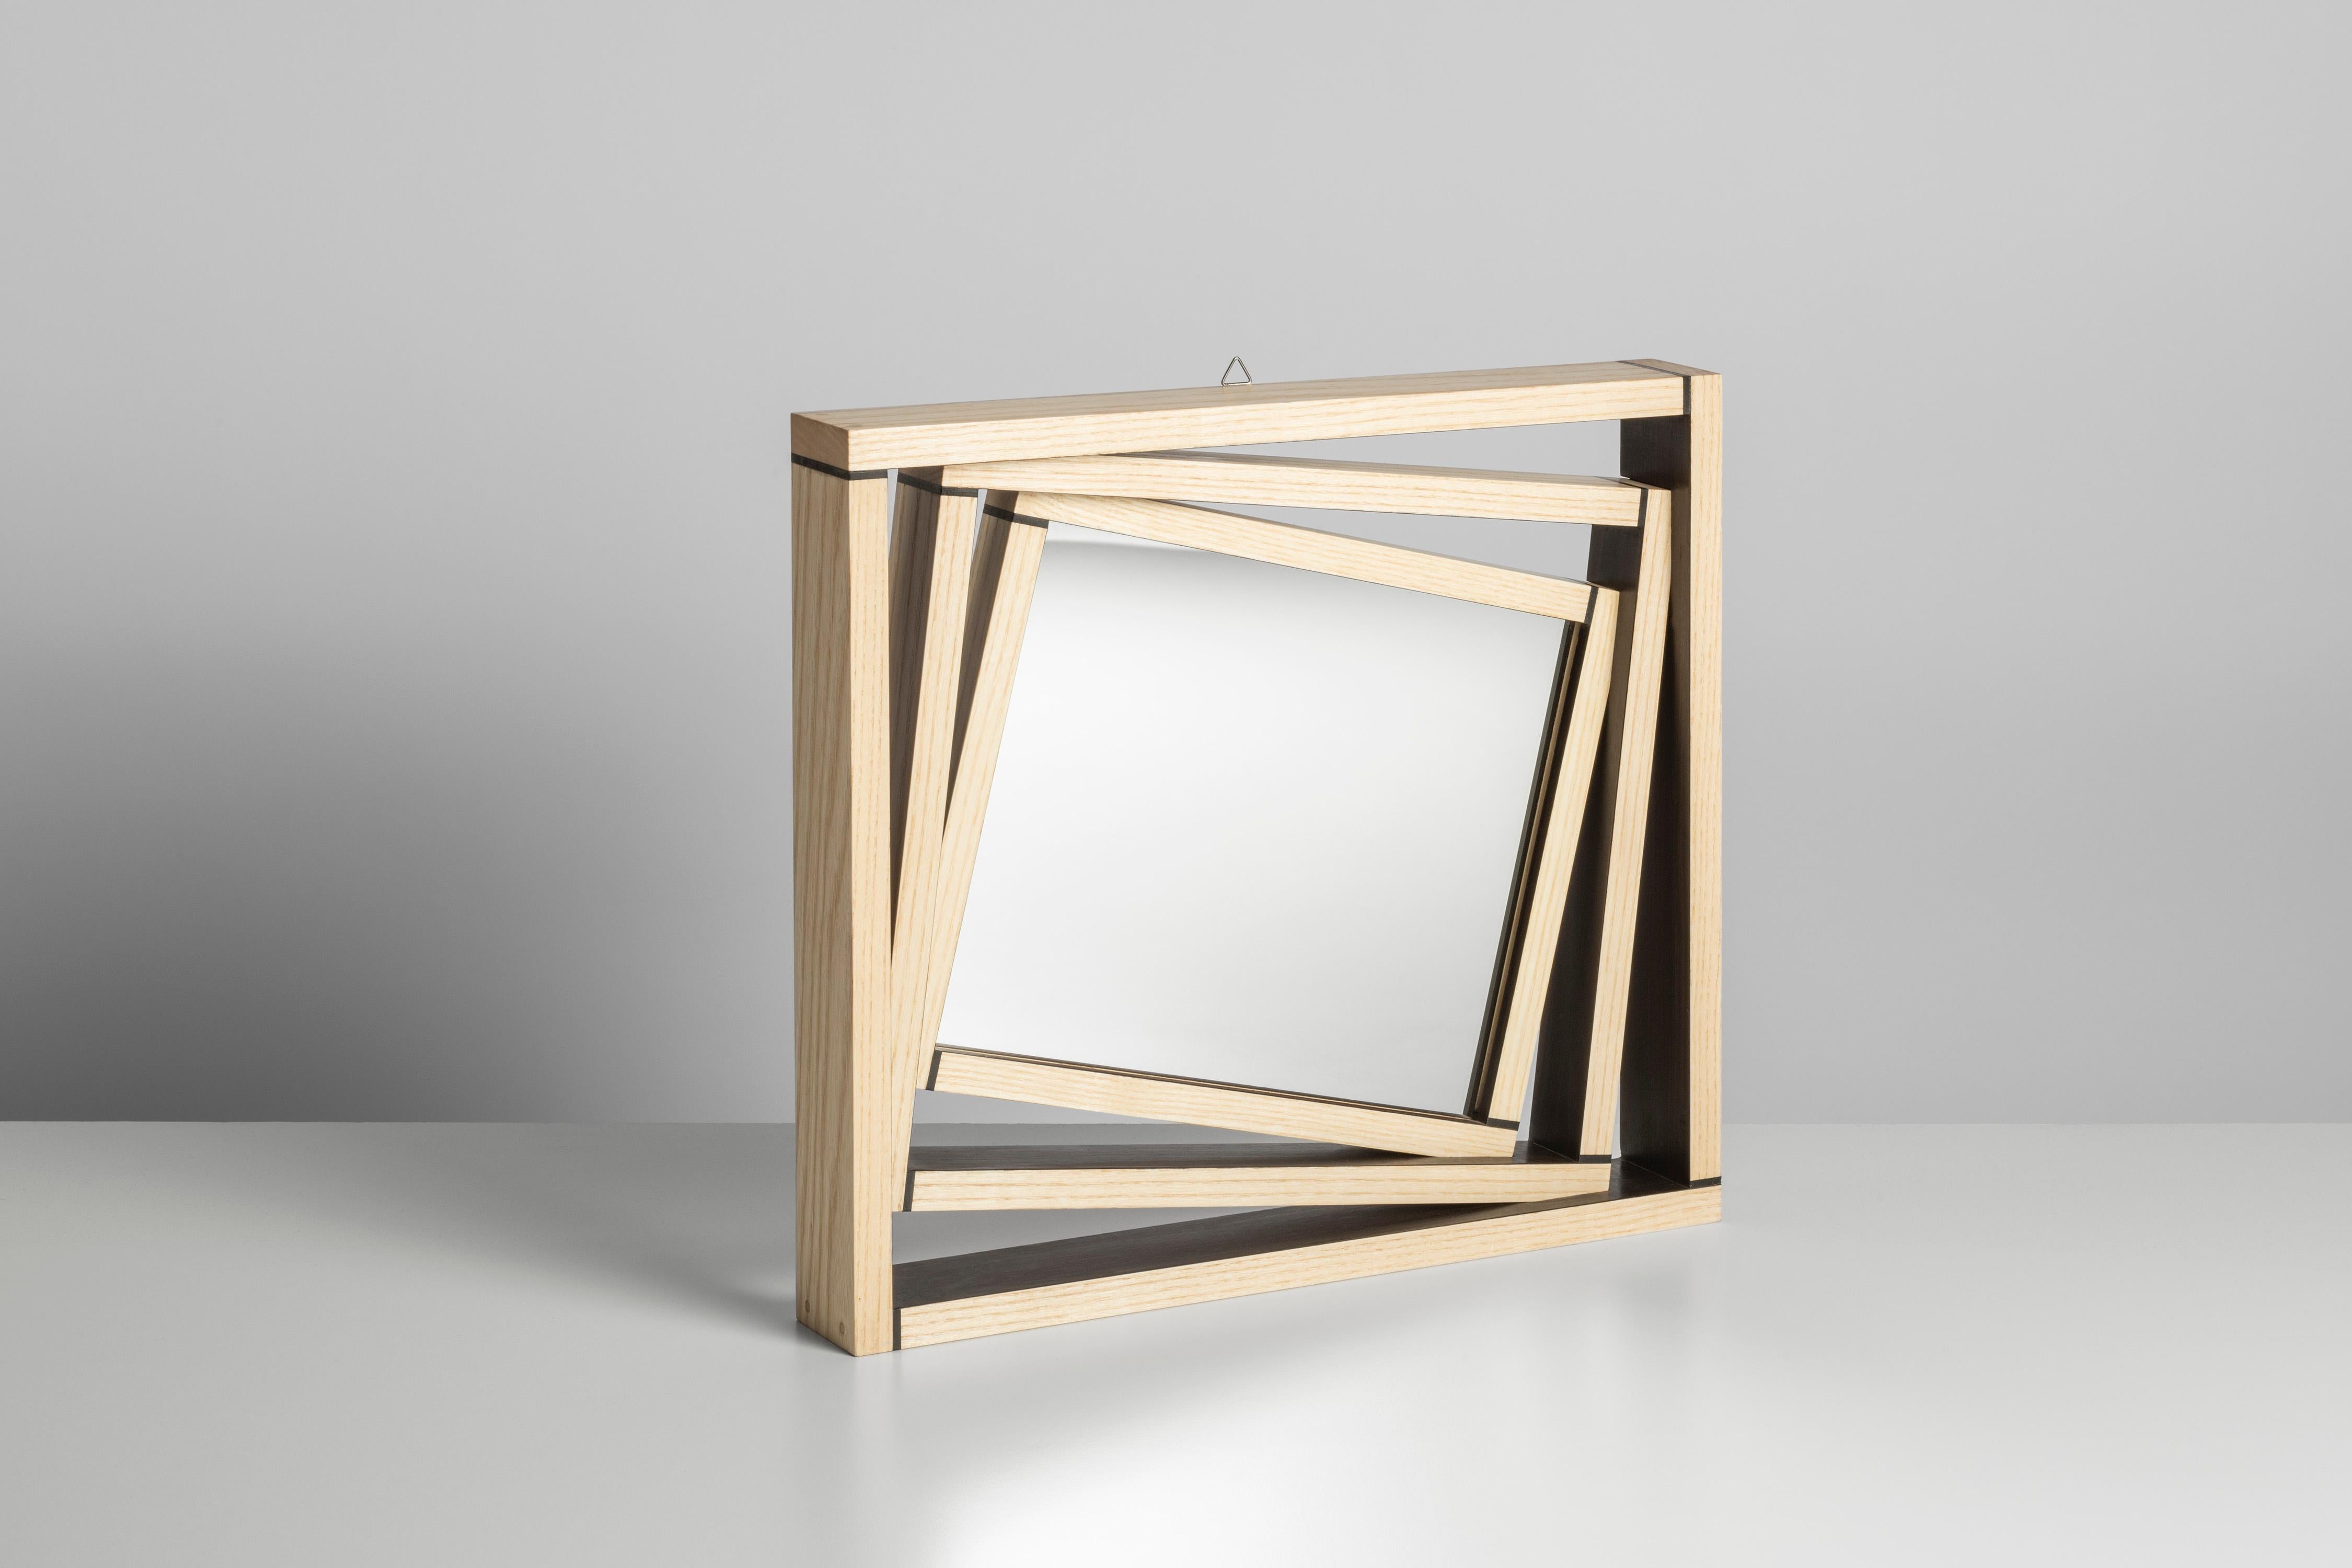 Italian Minimalist Style Mirror with Frame Made of Ash and Ebony by Giordano Vigano For Sale